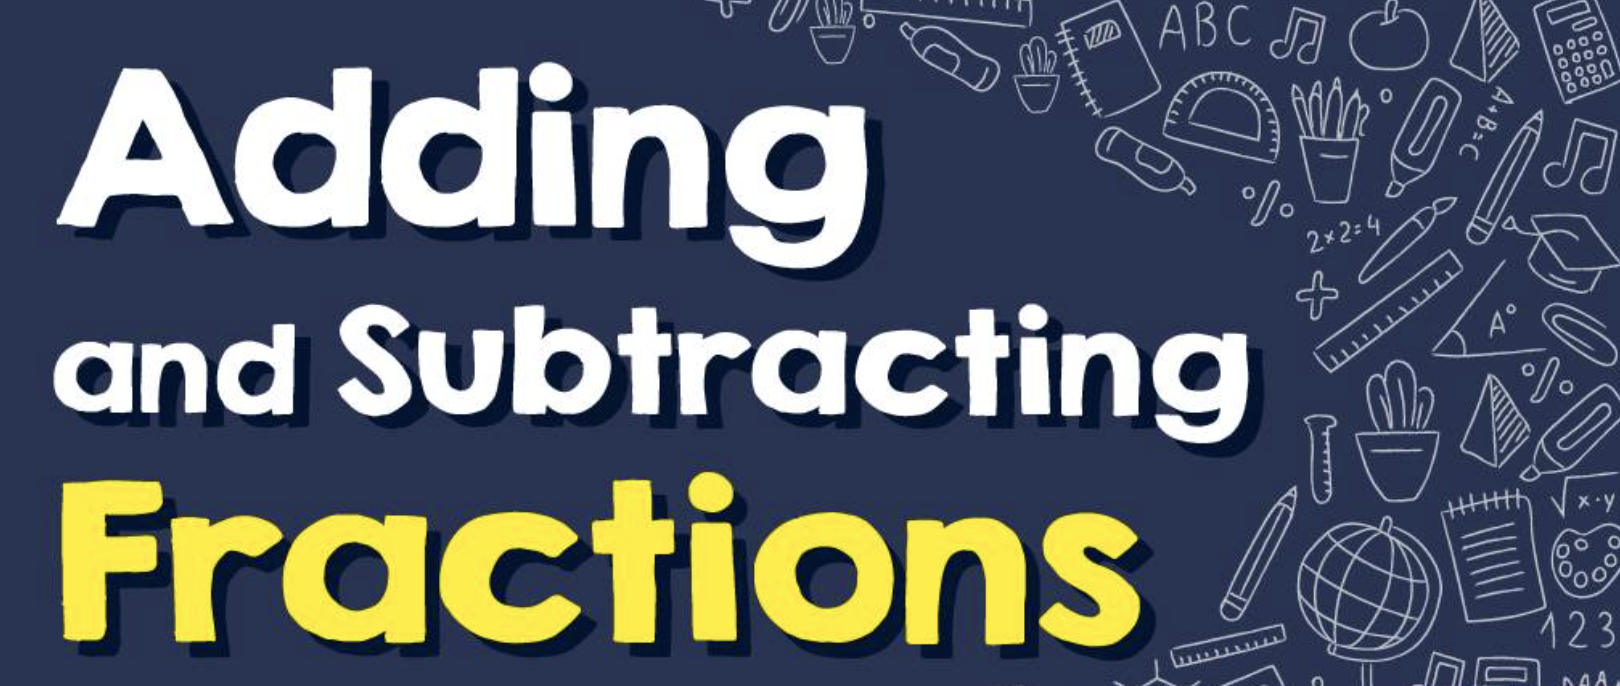 Subtracting Fractions with Like Denominators Flashcards - Quizizz